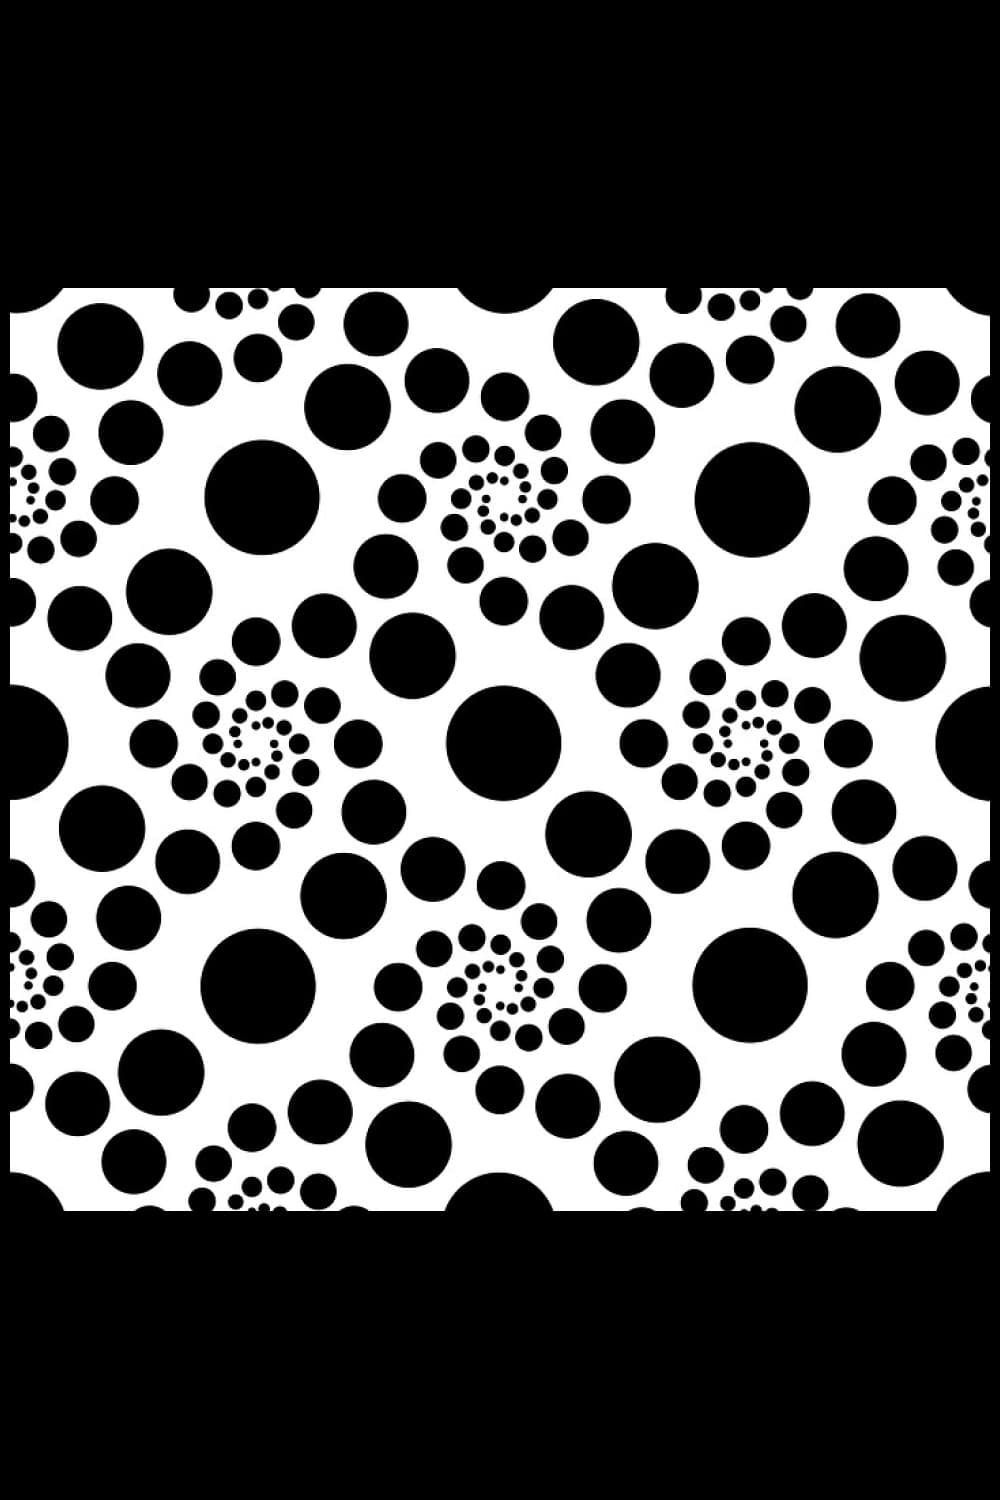 Collage with Dot Black and White Pattern.